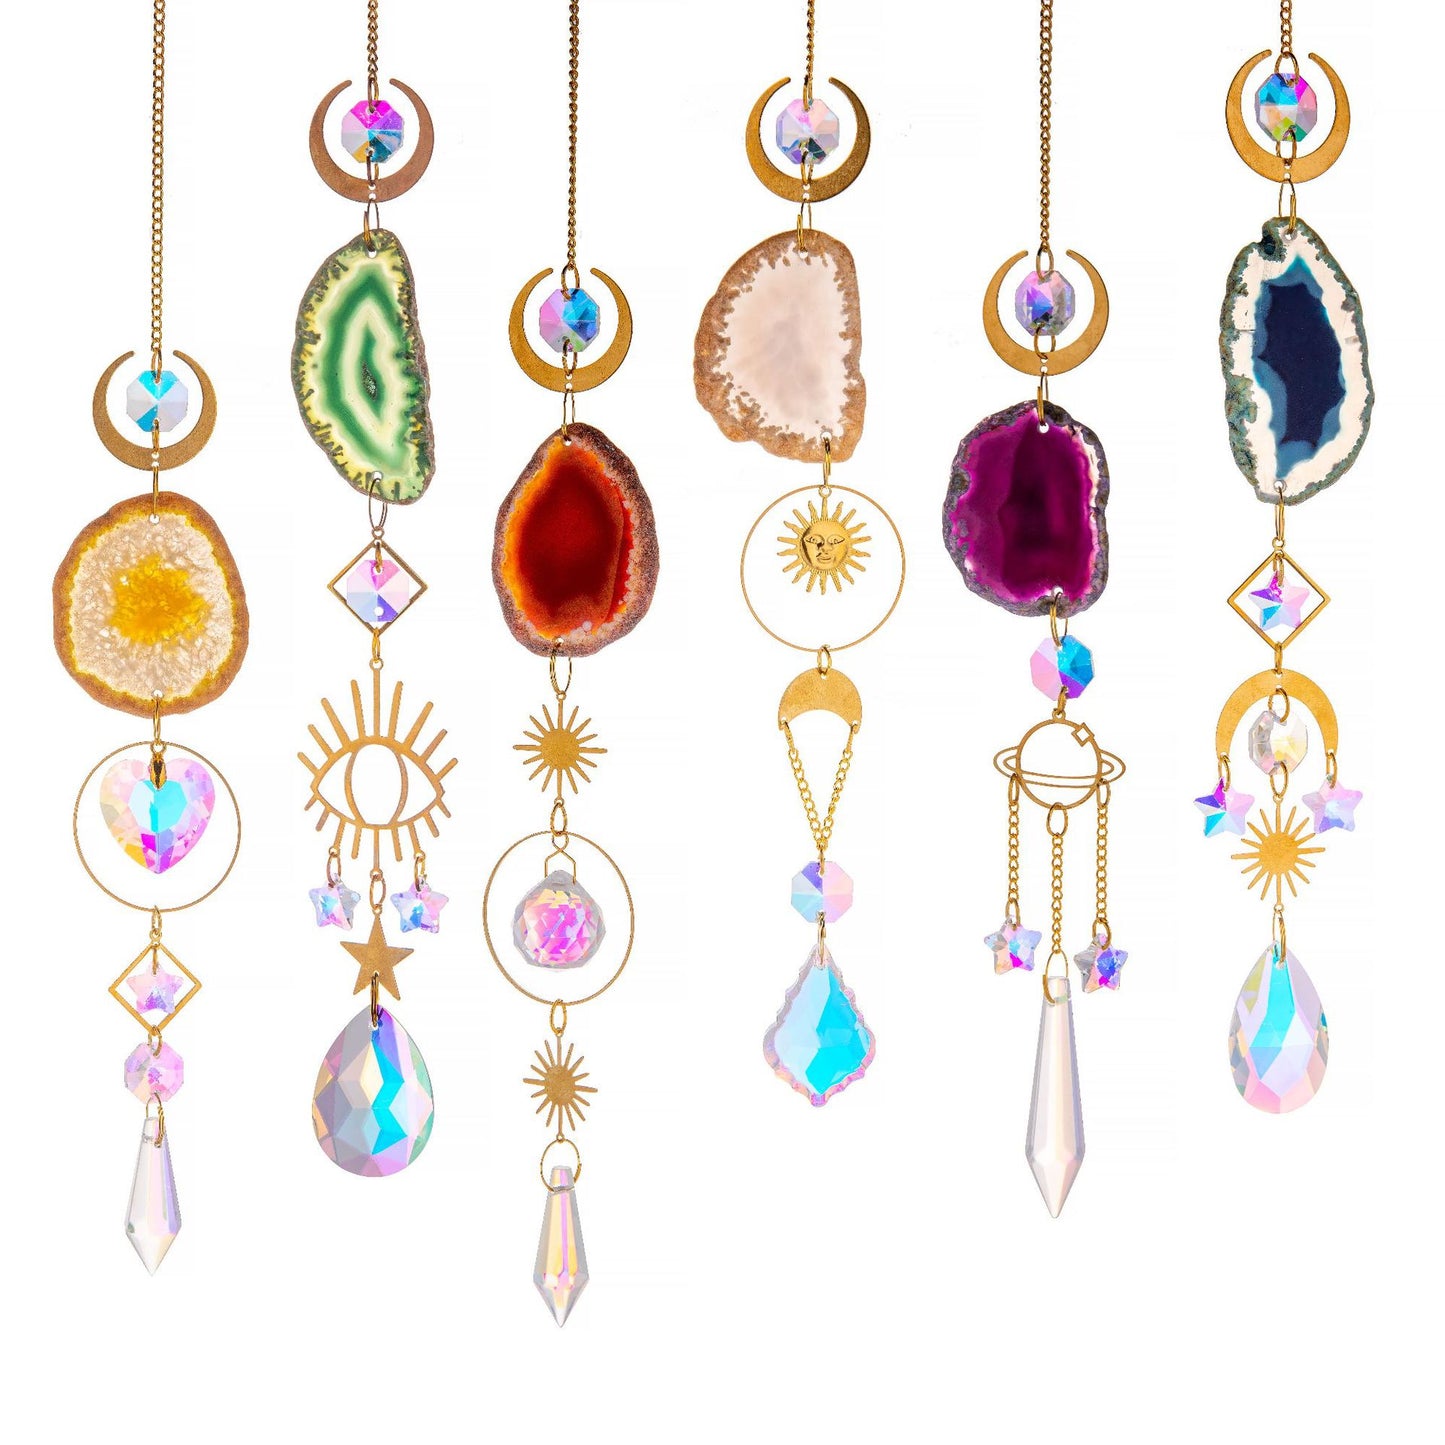 Agate Raw Stone Crystal Sun Catcher Rainbow Manufacture Hanging Window Vehicle Pendant Prism Ball